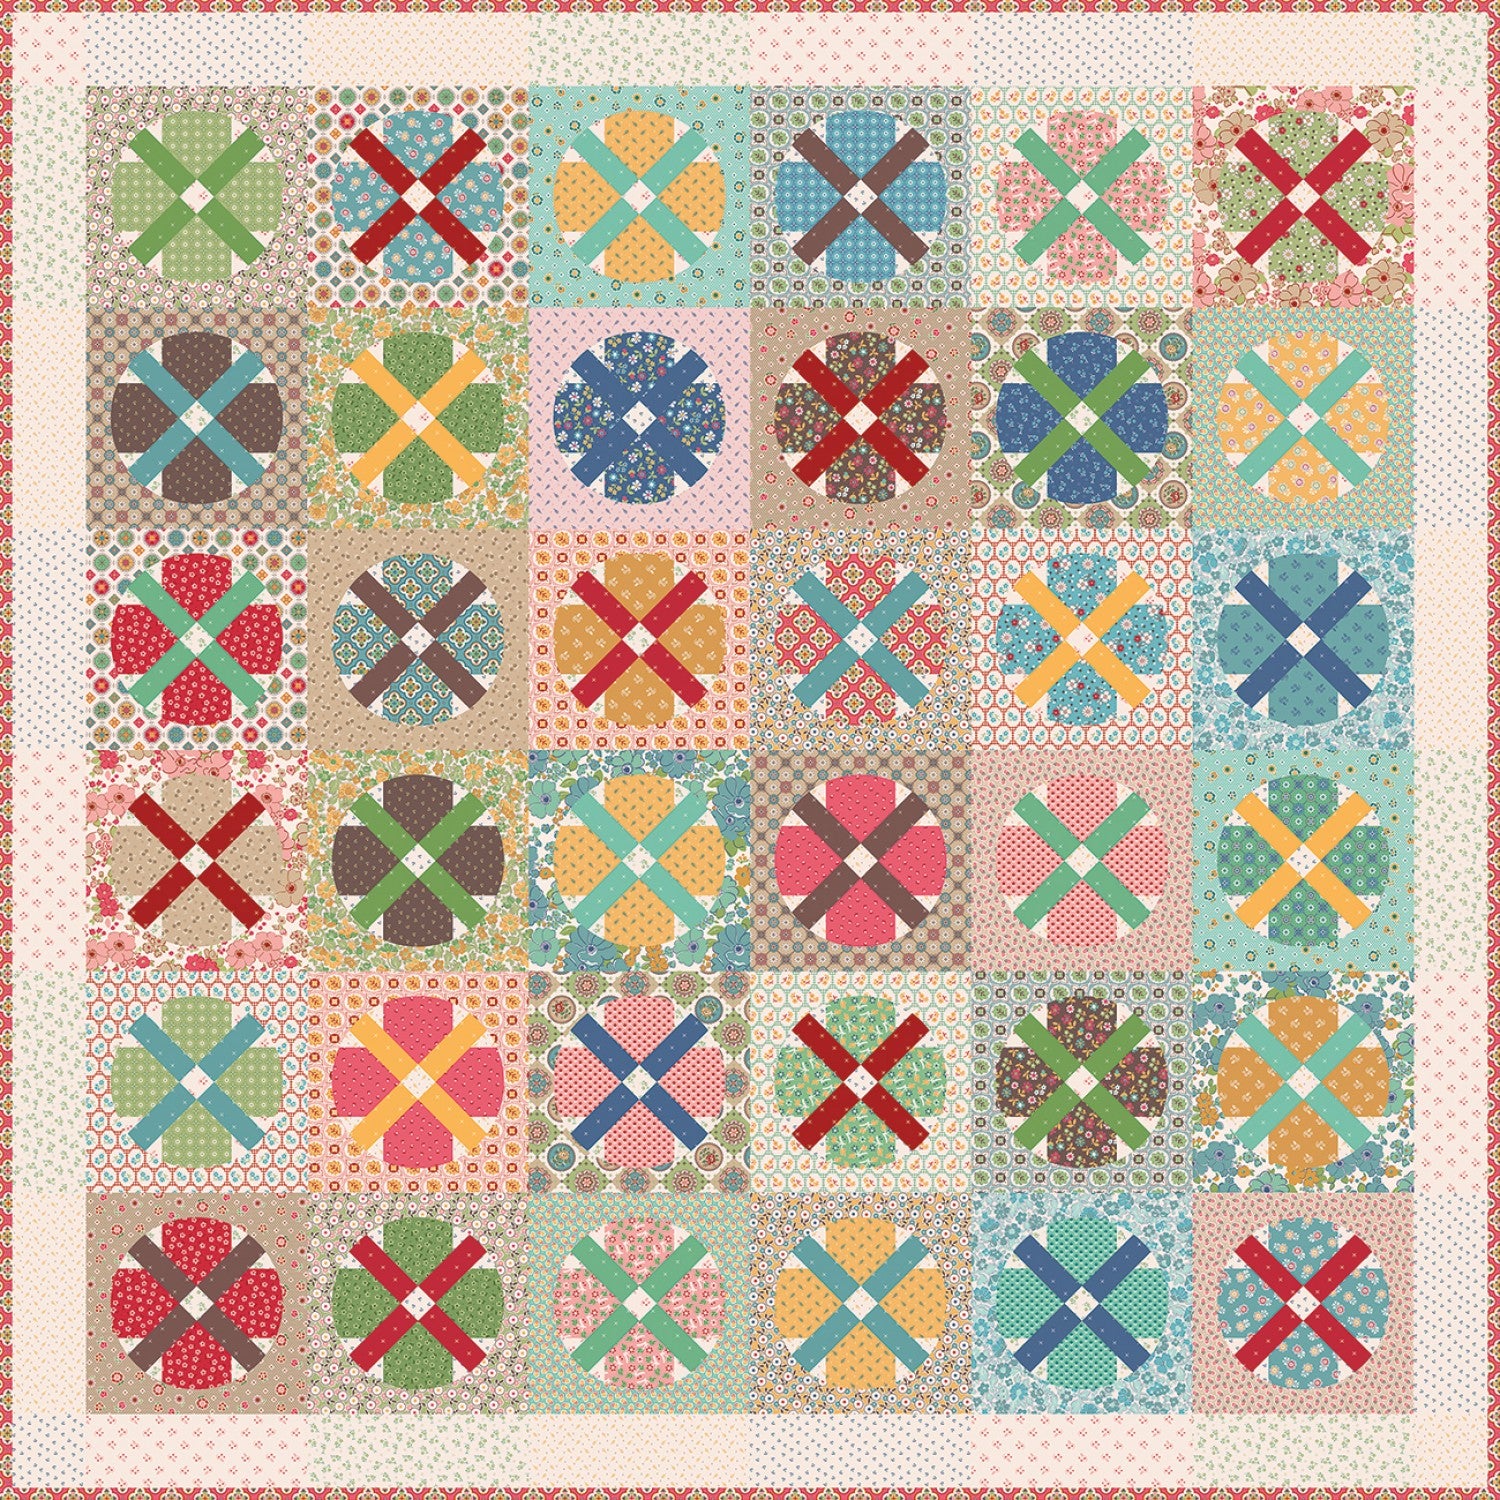 Mercantile Penny Candy Quilt Kit by Lori Holt (60" x 60")